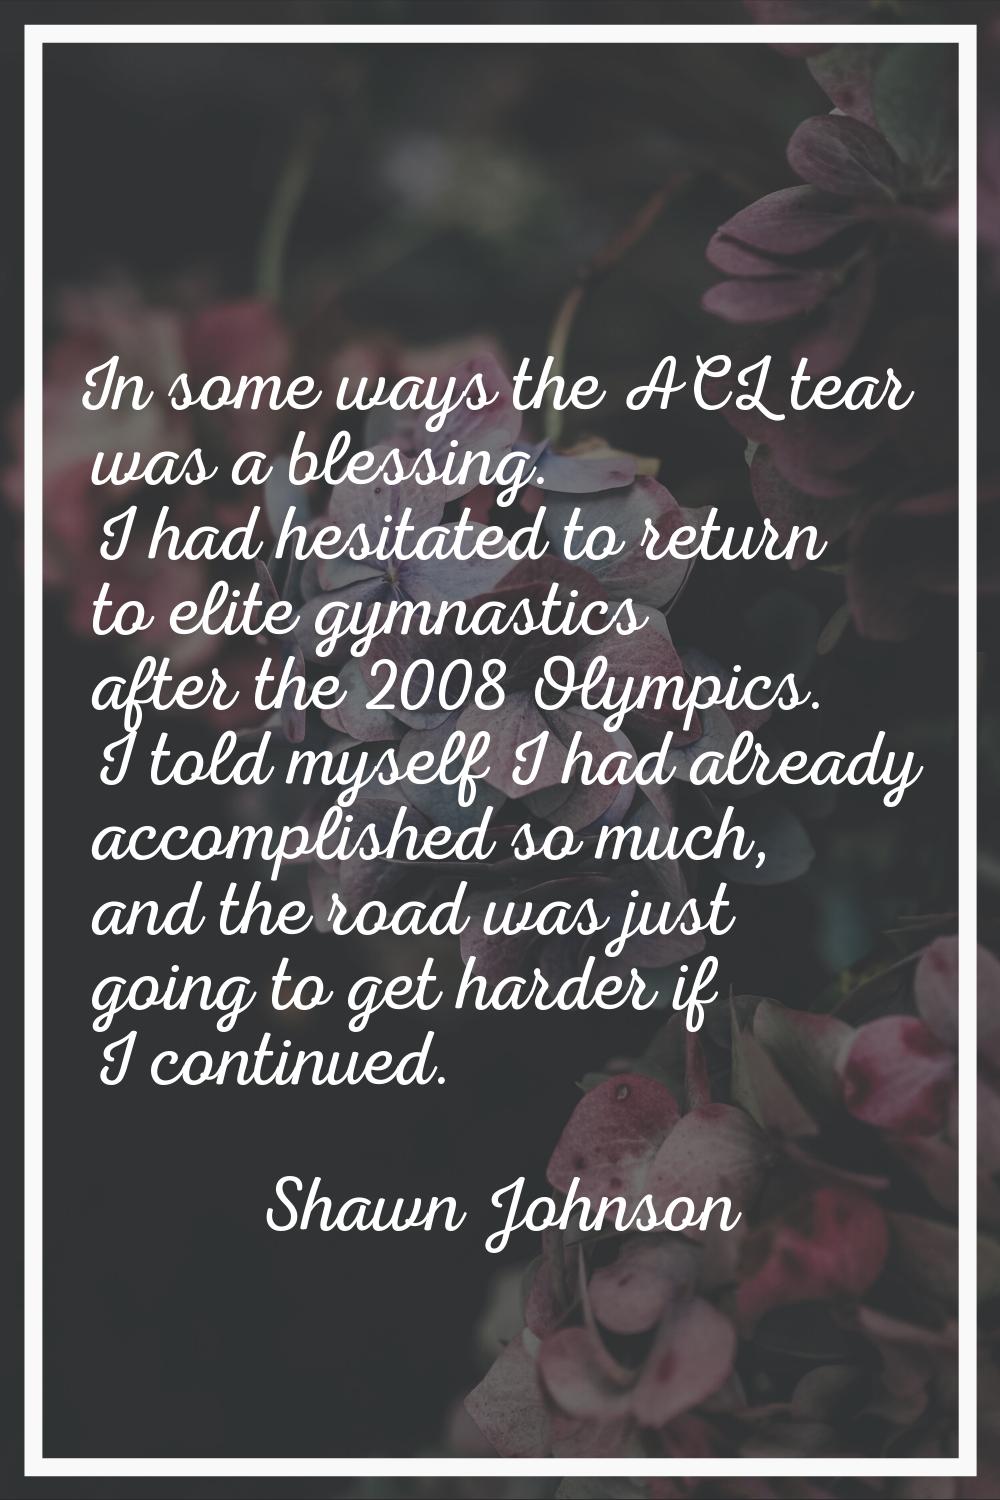 In some ways the ACL tear was a blessing. I had hesitated to return to elite gymnastics after the 2